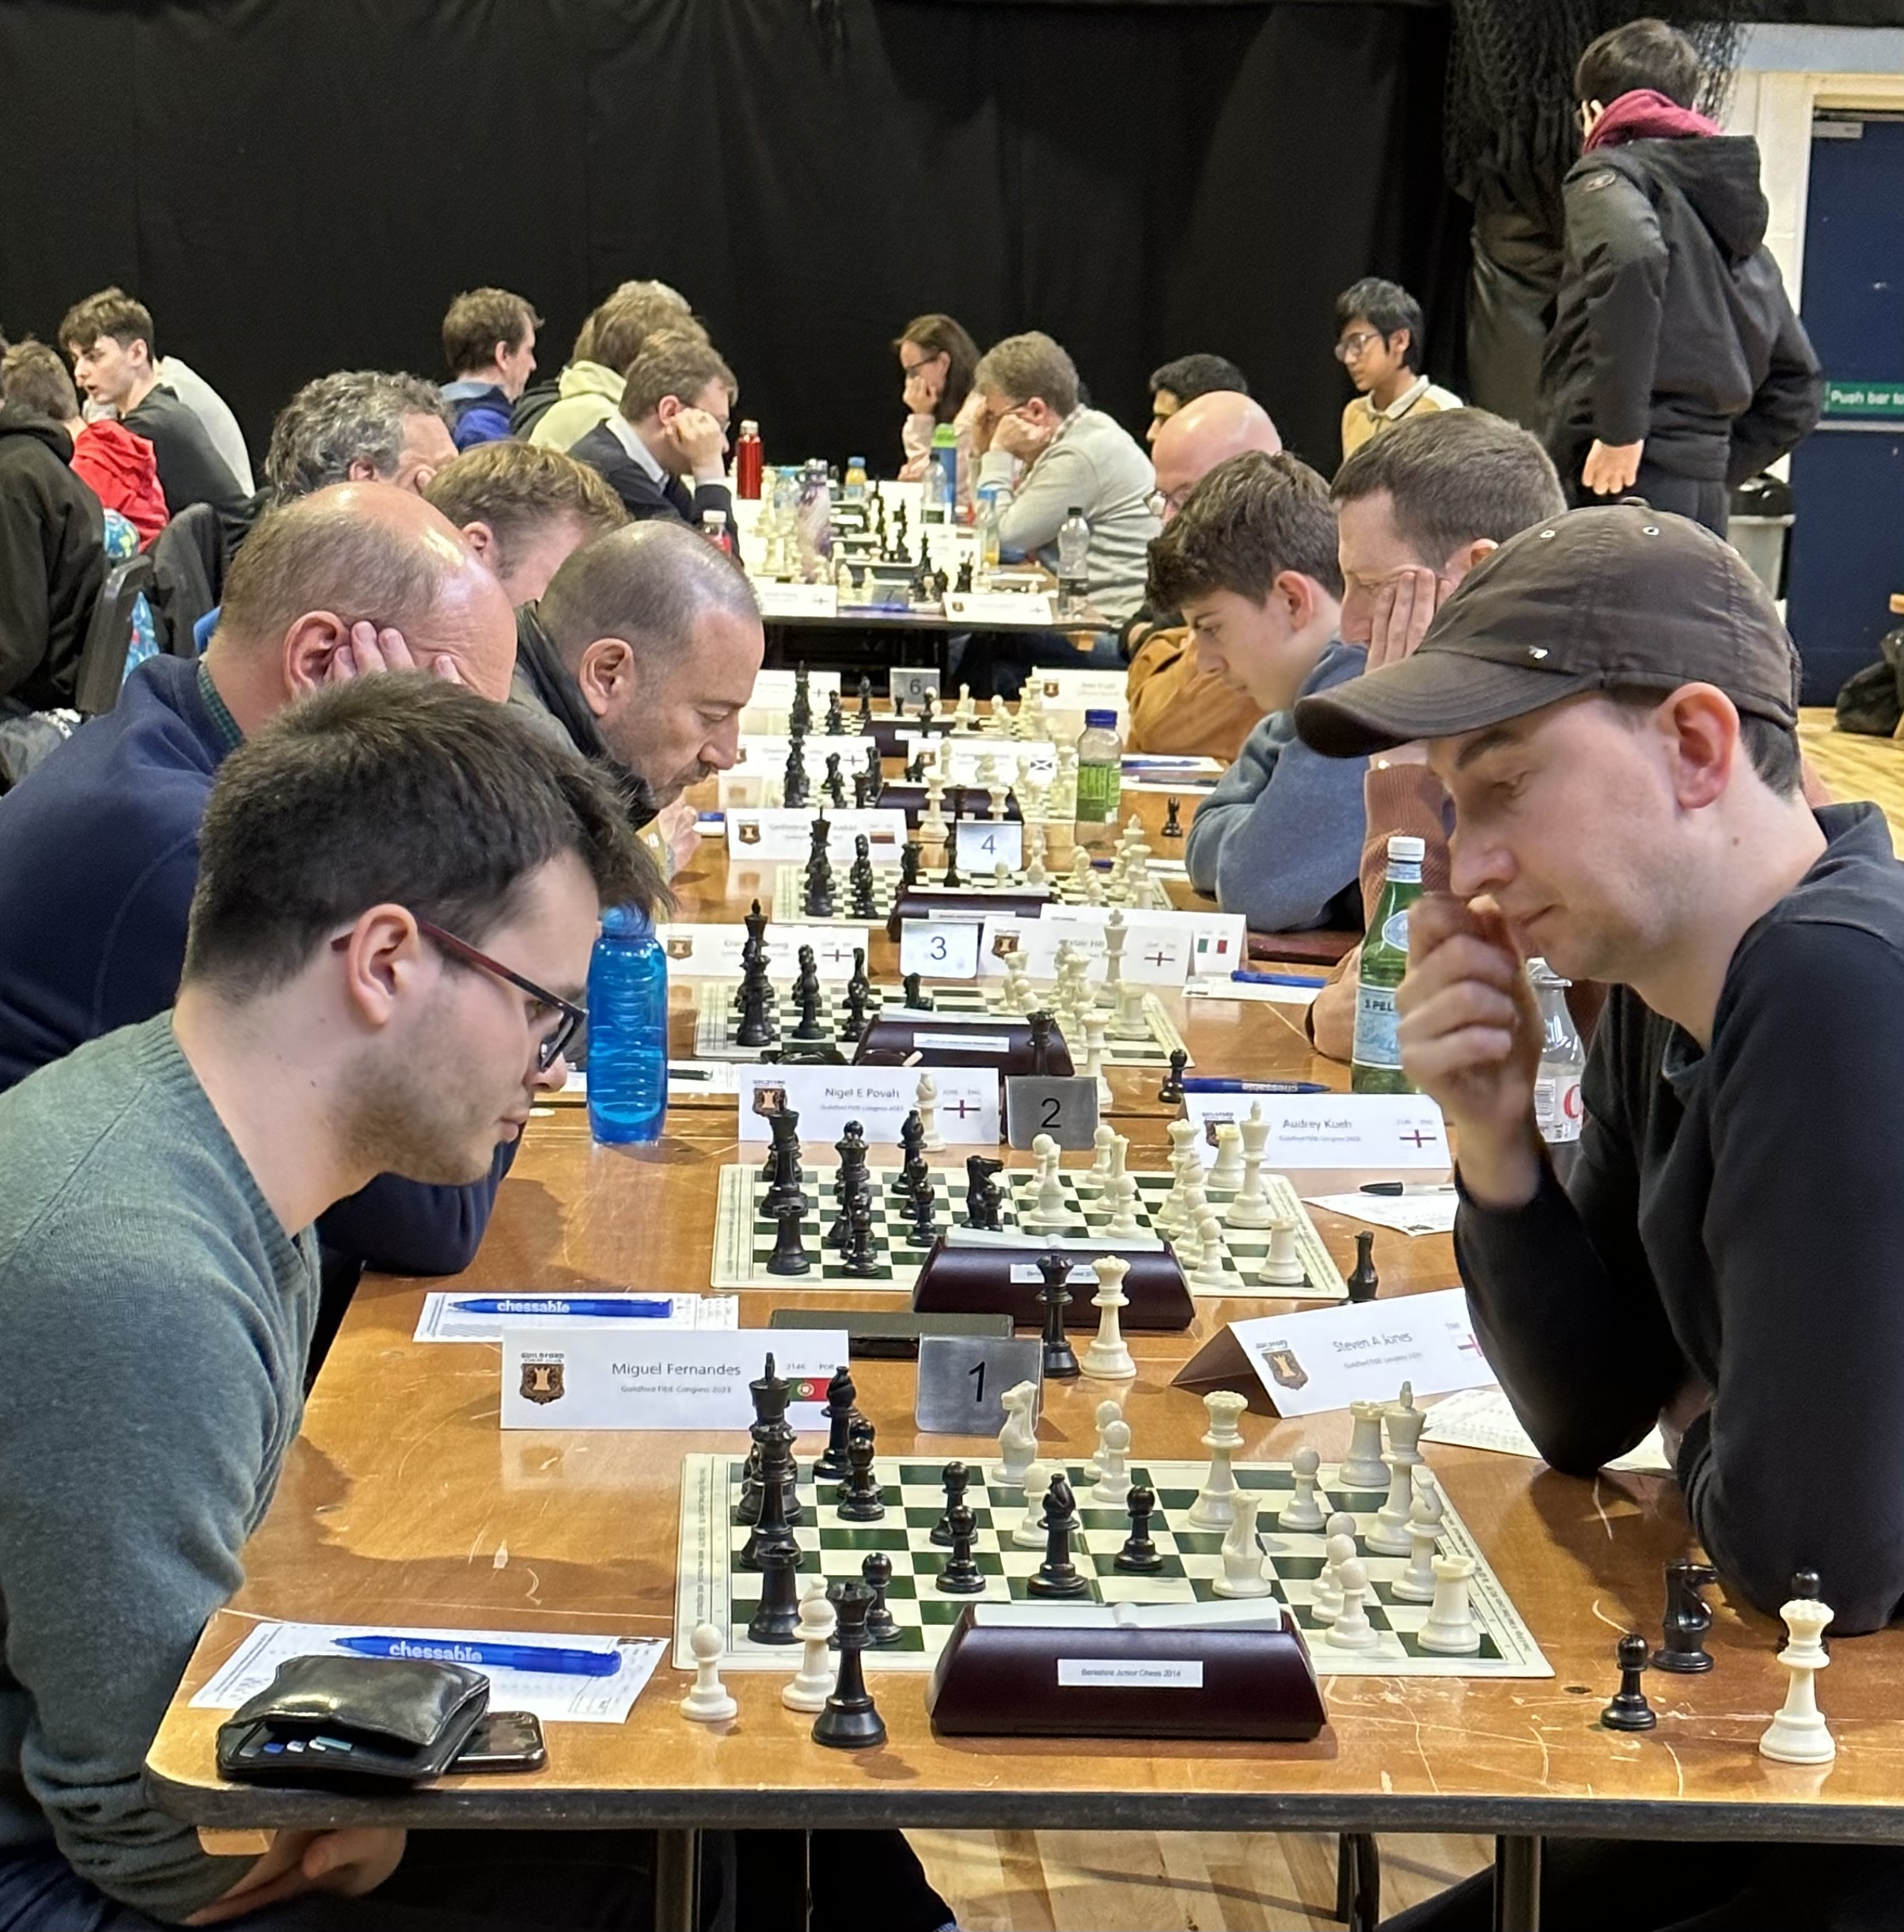 Players in the Open section